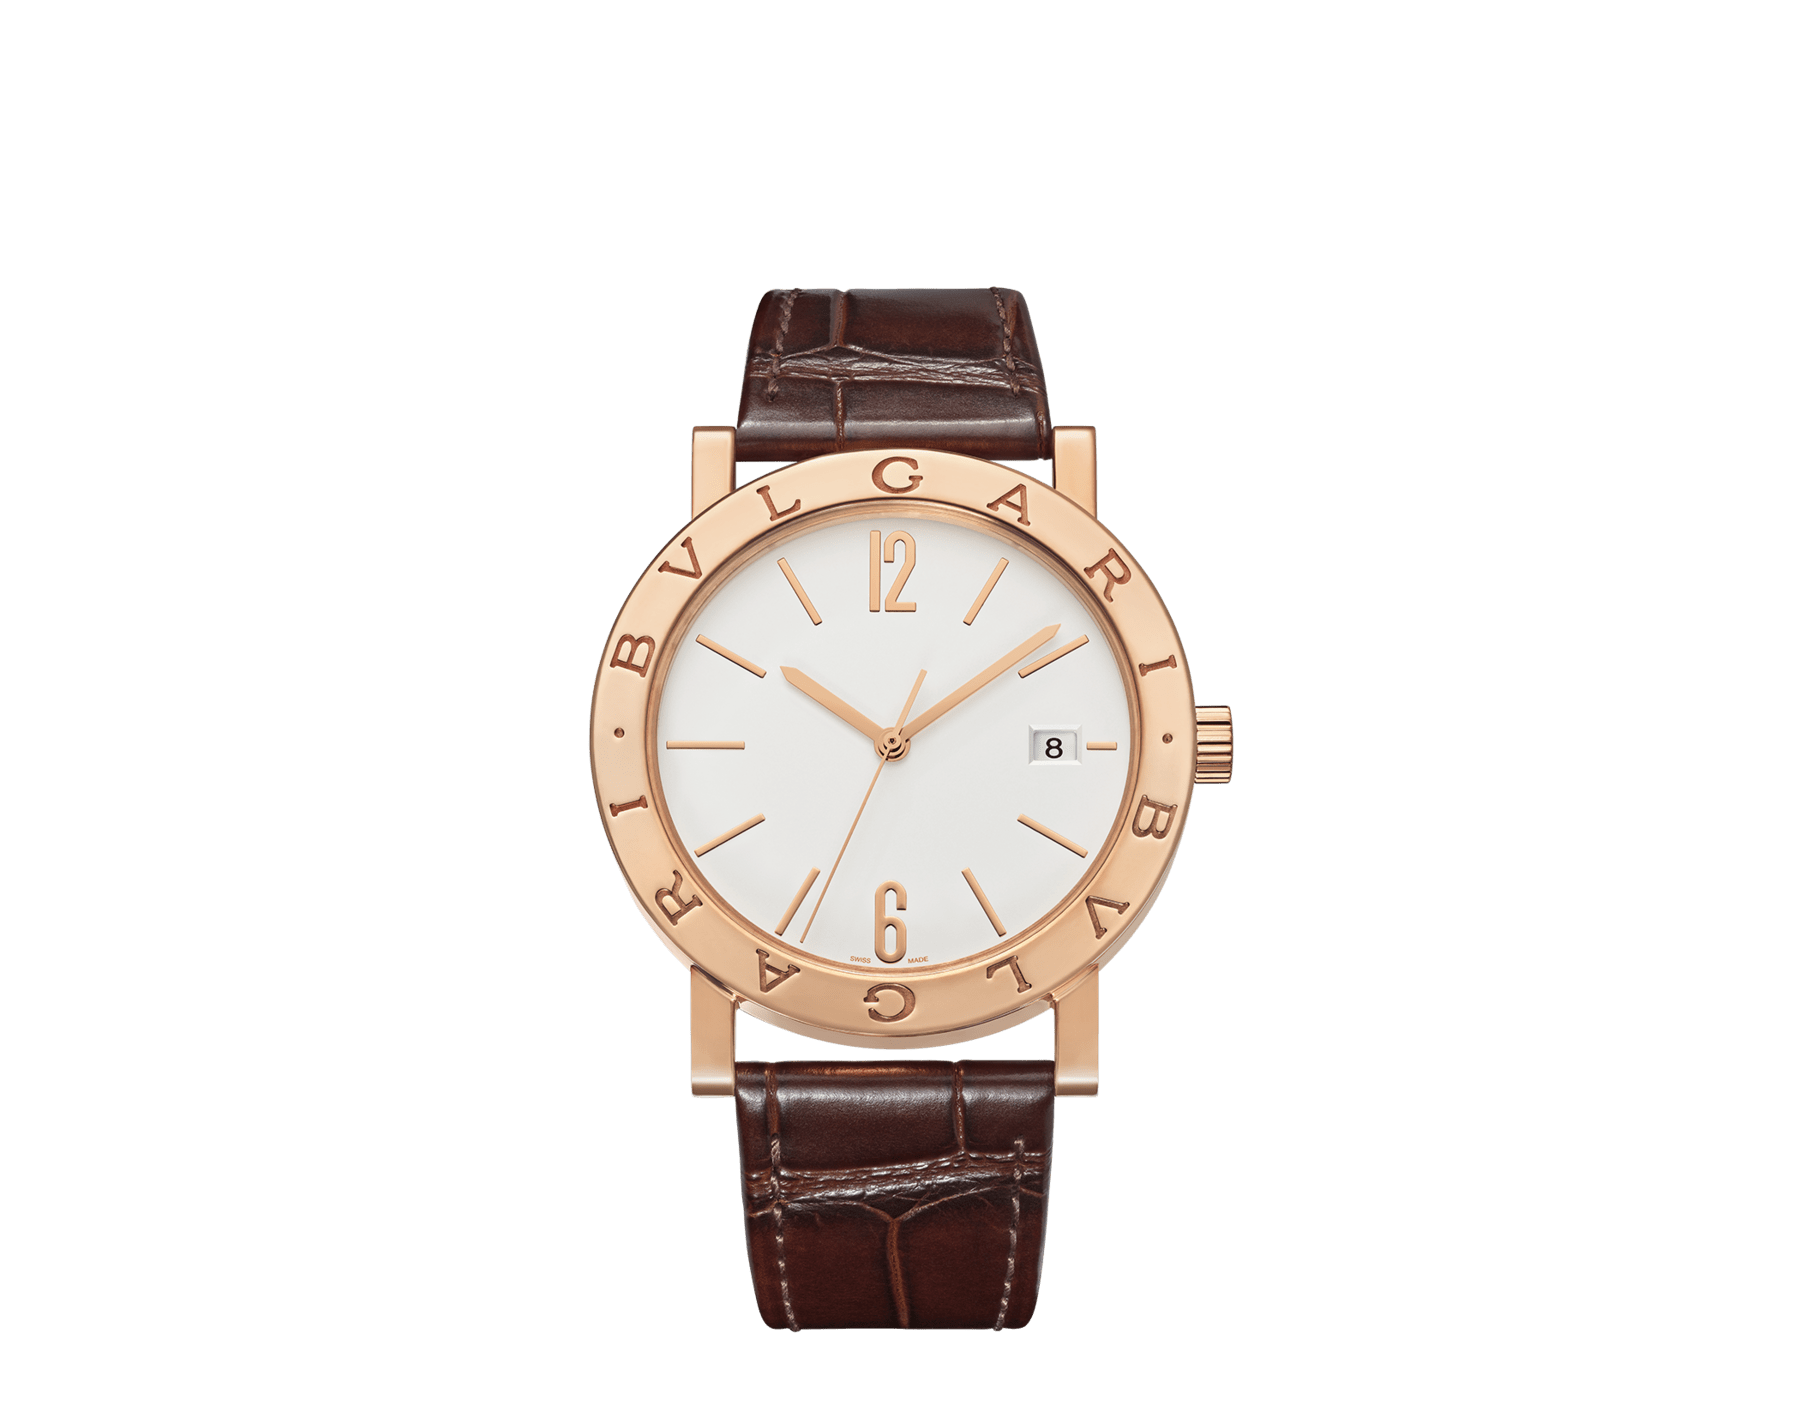 BULGARI BULGARI watch with mechanical automatic in-house movement, 18 kt rose gold case and bezel engraved with double logo, white opaline dial and brown alligator bracelet. Water resistant up to 50 meters 103968 image 1